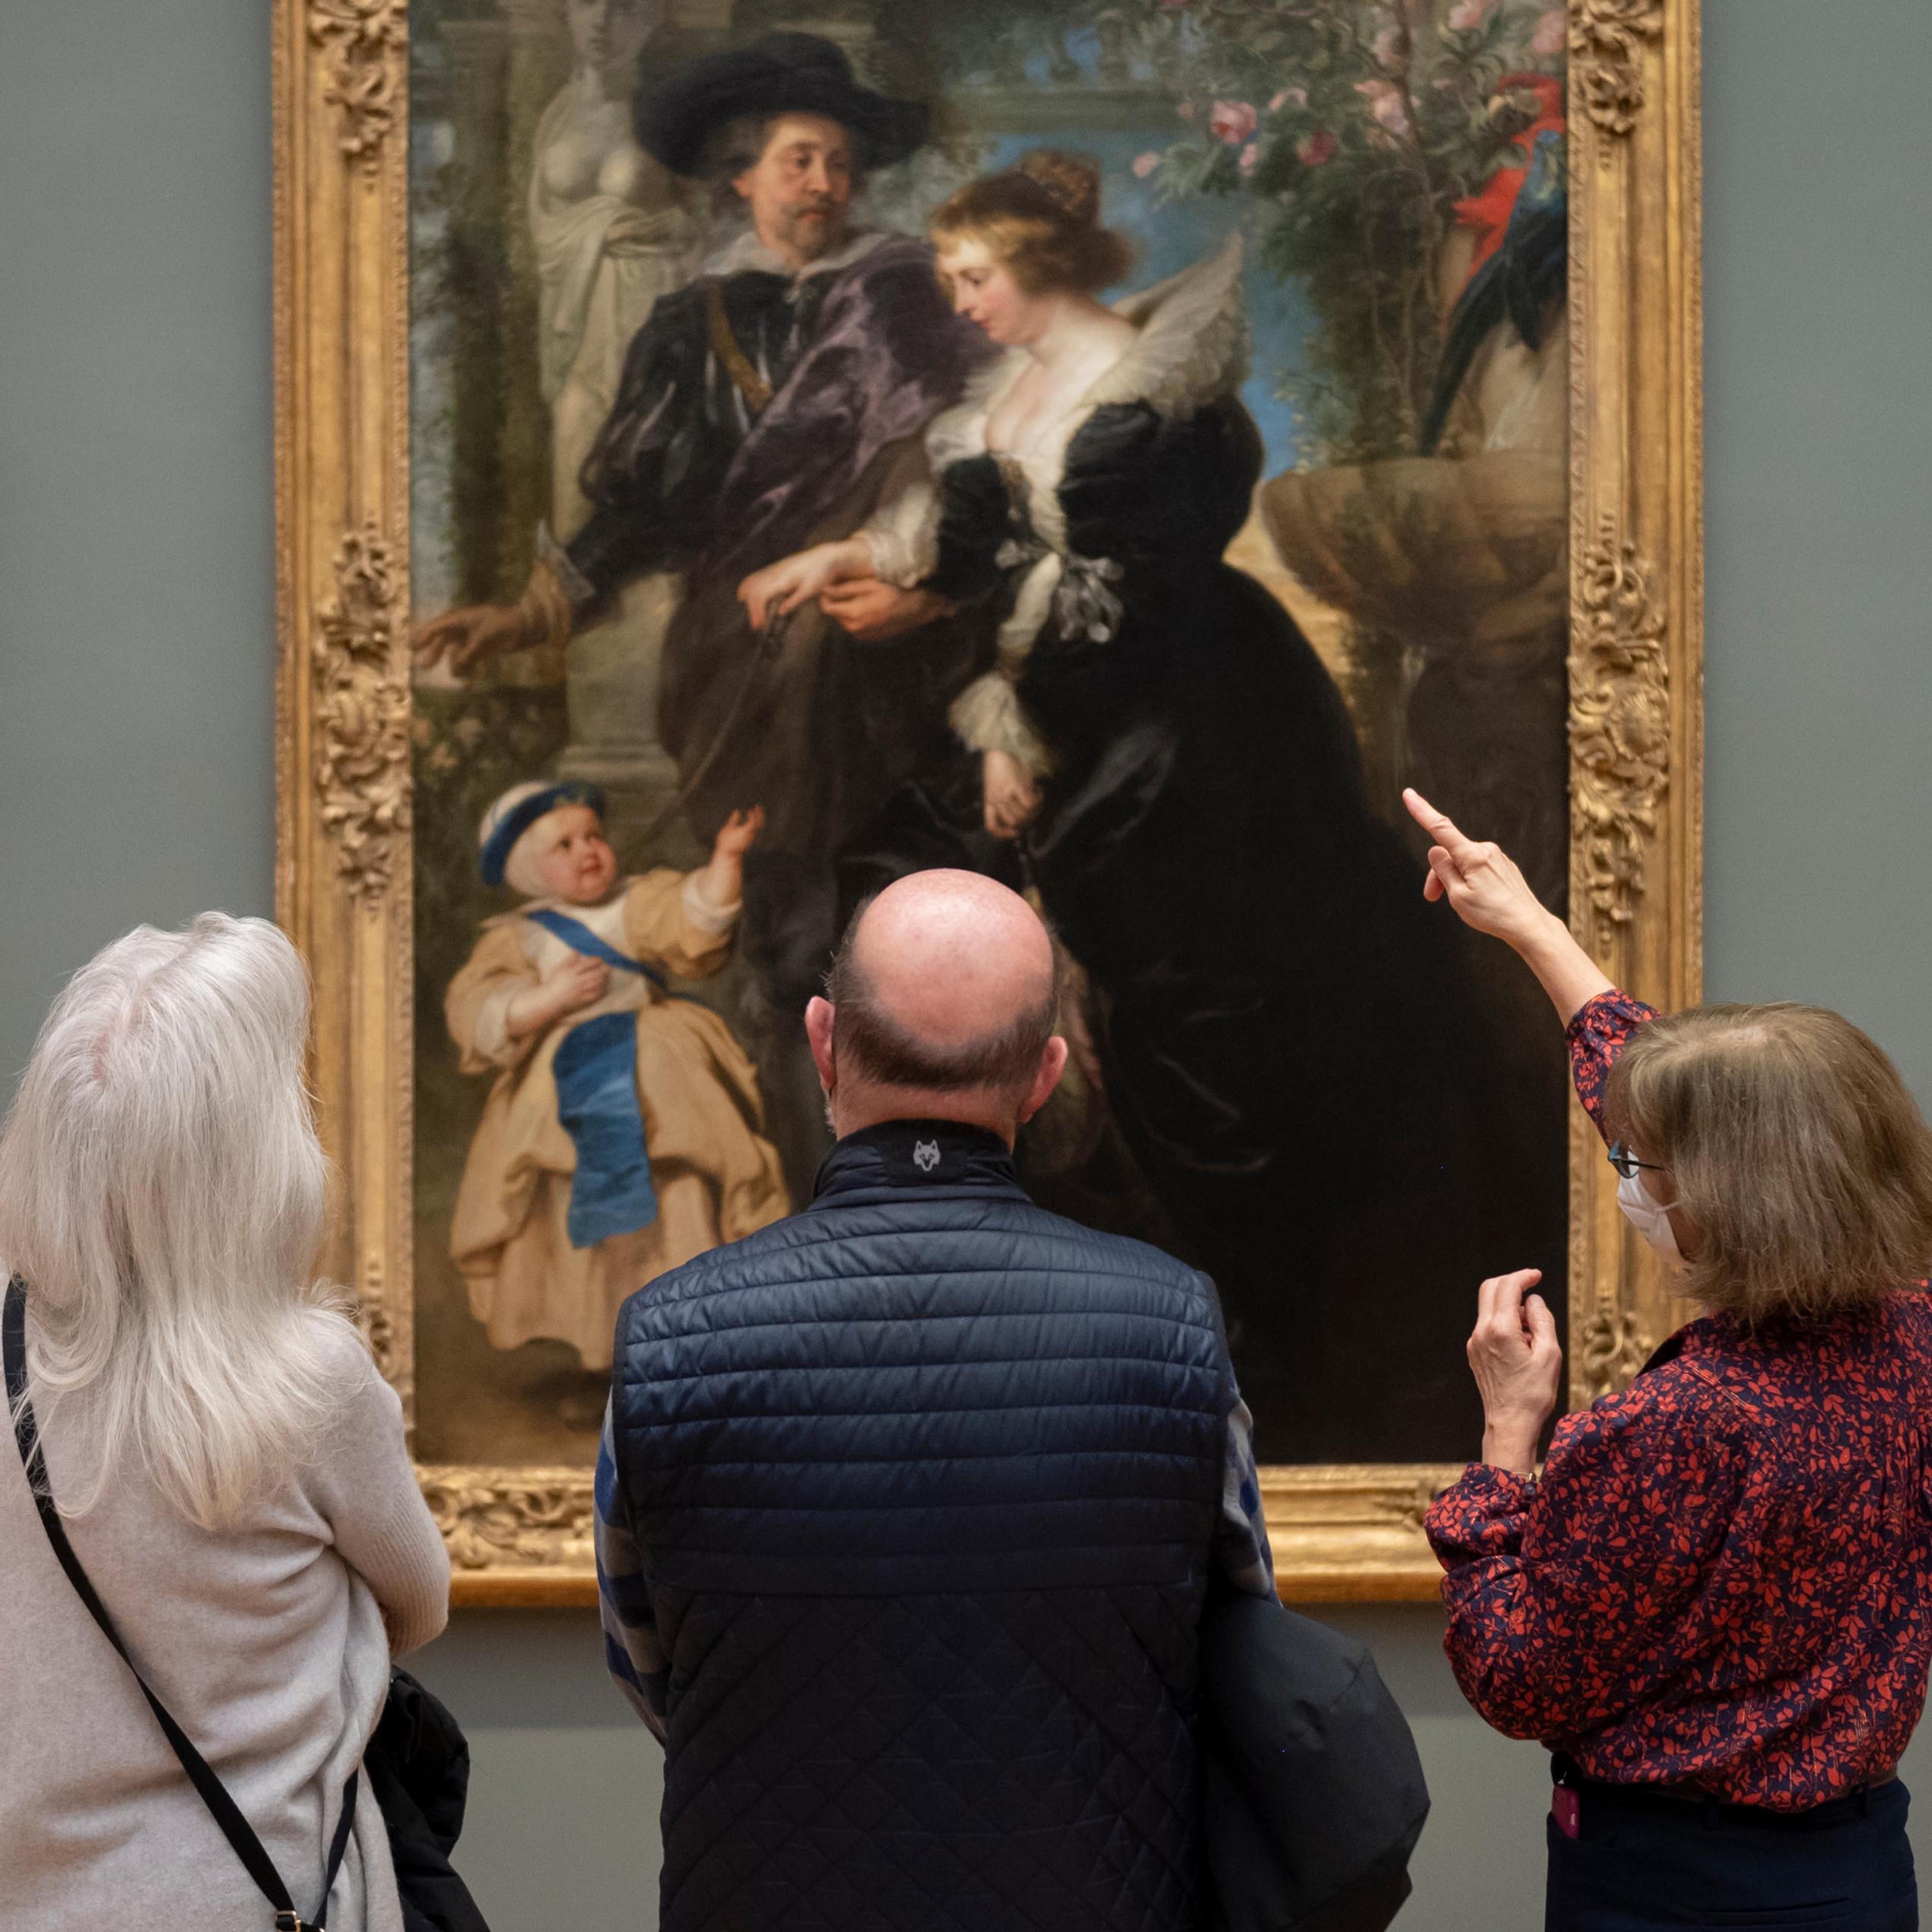 A tour guide points to details on a painting